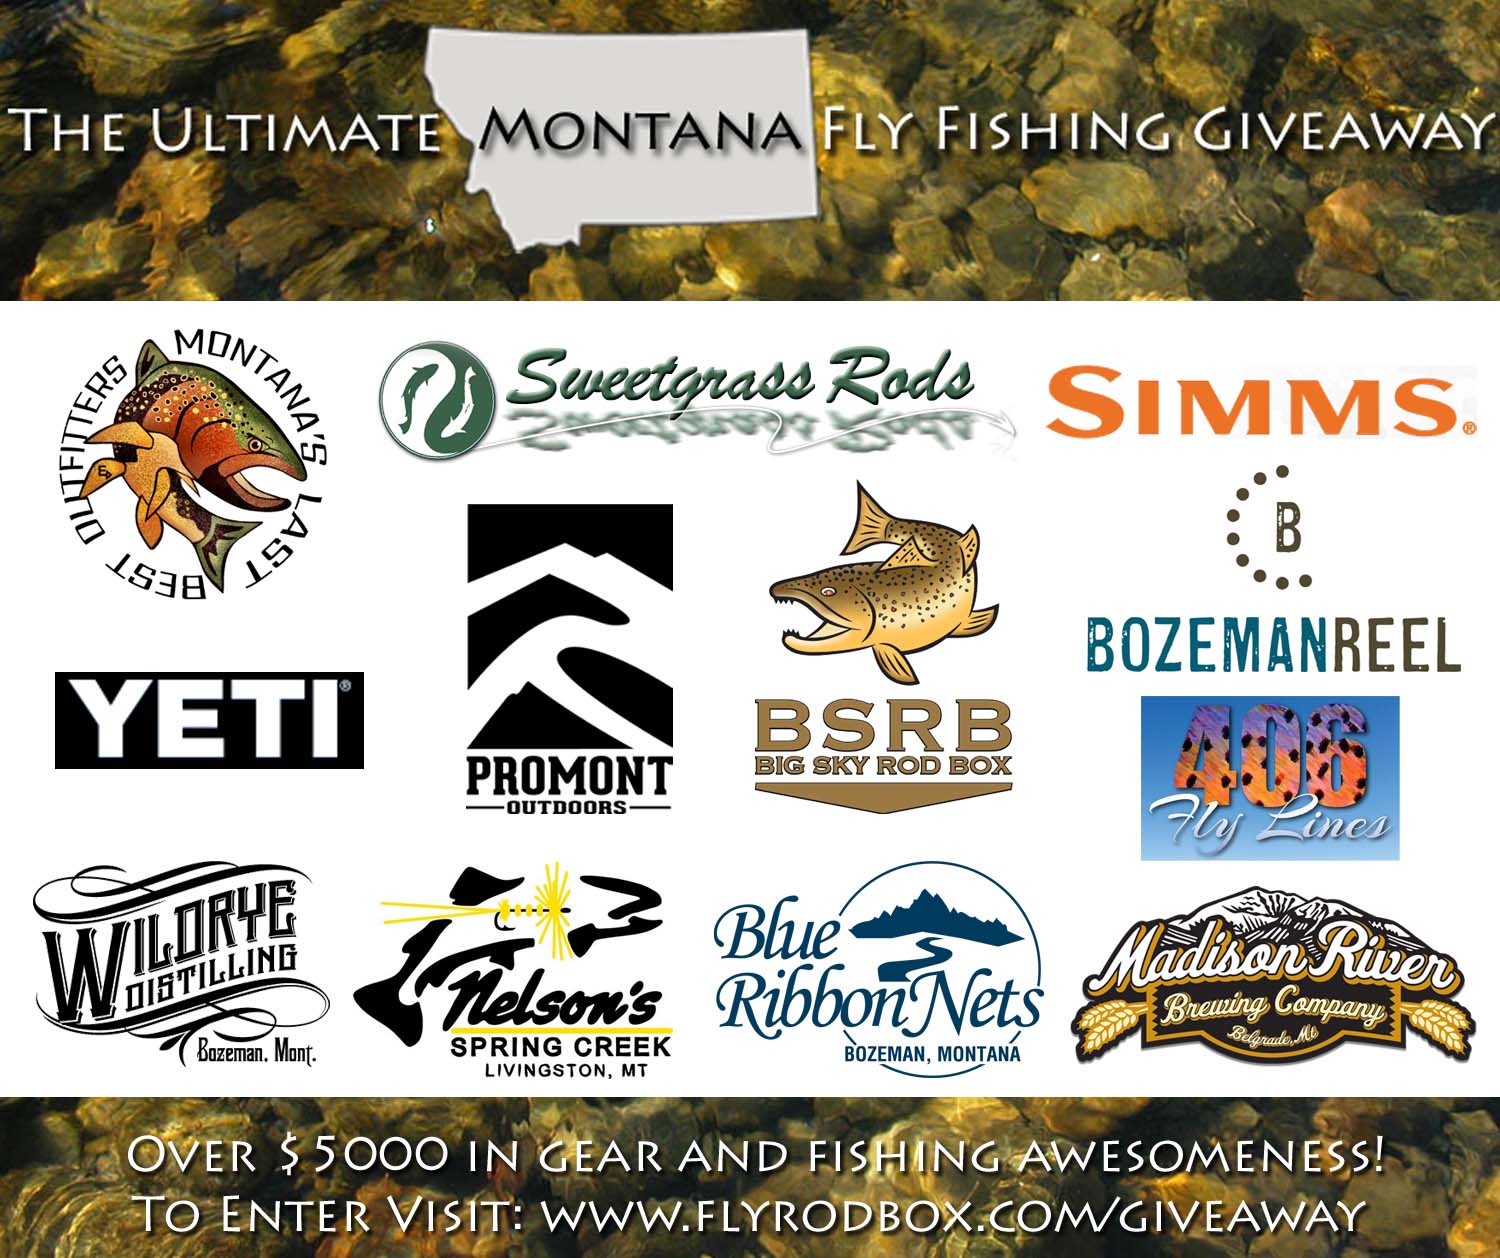 The Ultimate Montana Fly Fishing Giveaway